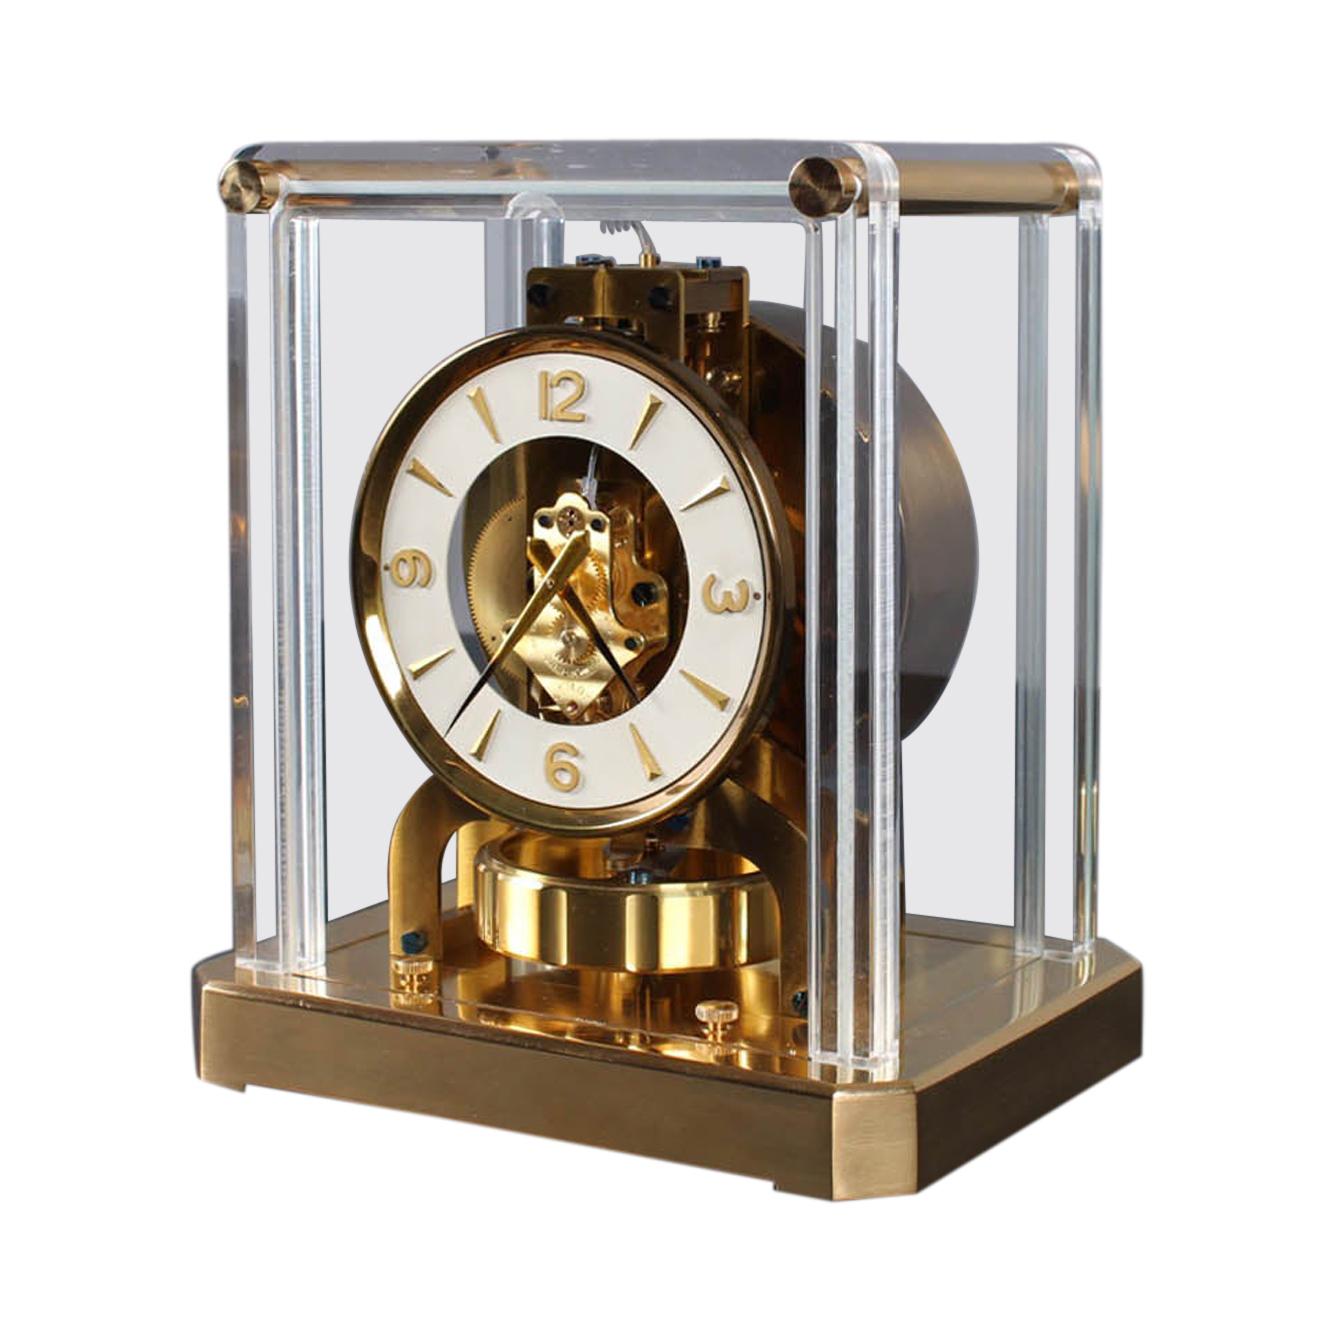 JAEGER LE COULTRE ATMOS CLOCK ORIGINAL #540,560 FRONT GLASS WITH GOLD KNOB 